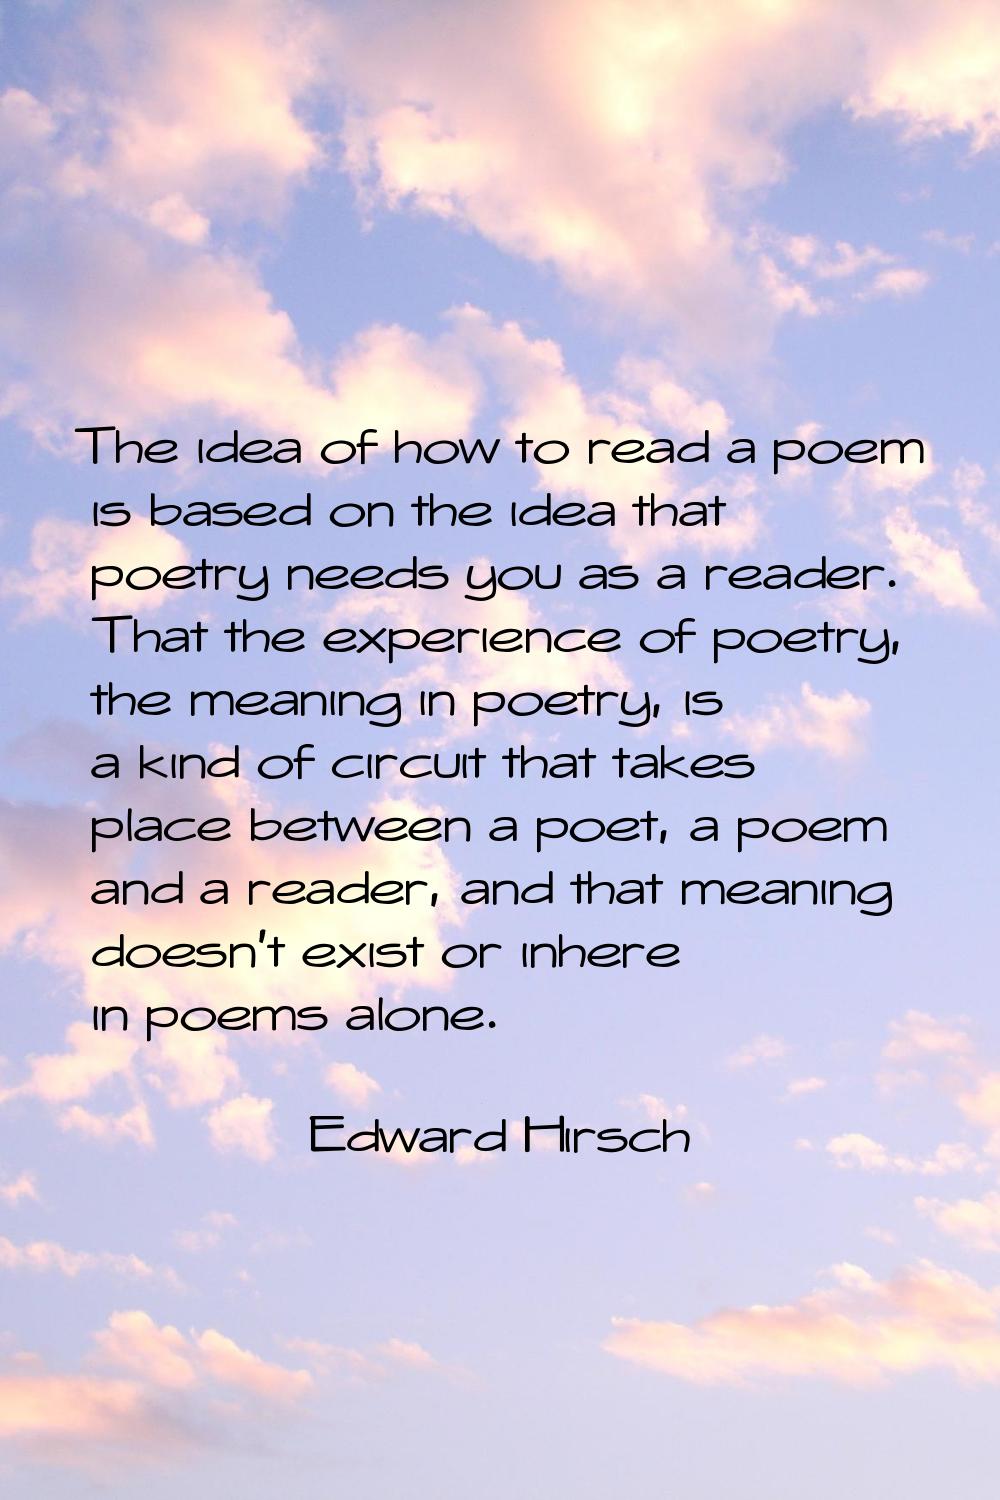 The idea of how to read a poem is based on the idea that poetry needs you as a reader. That the exp